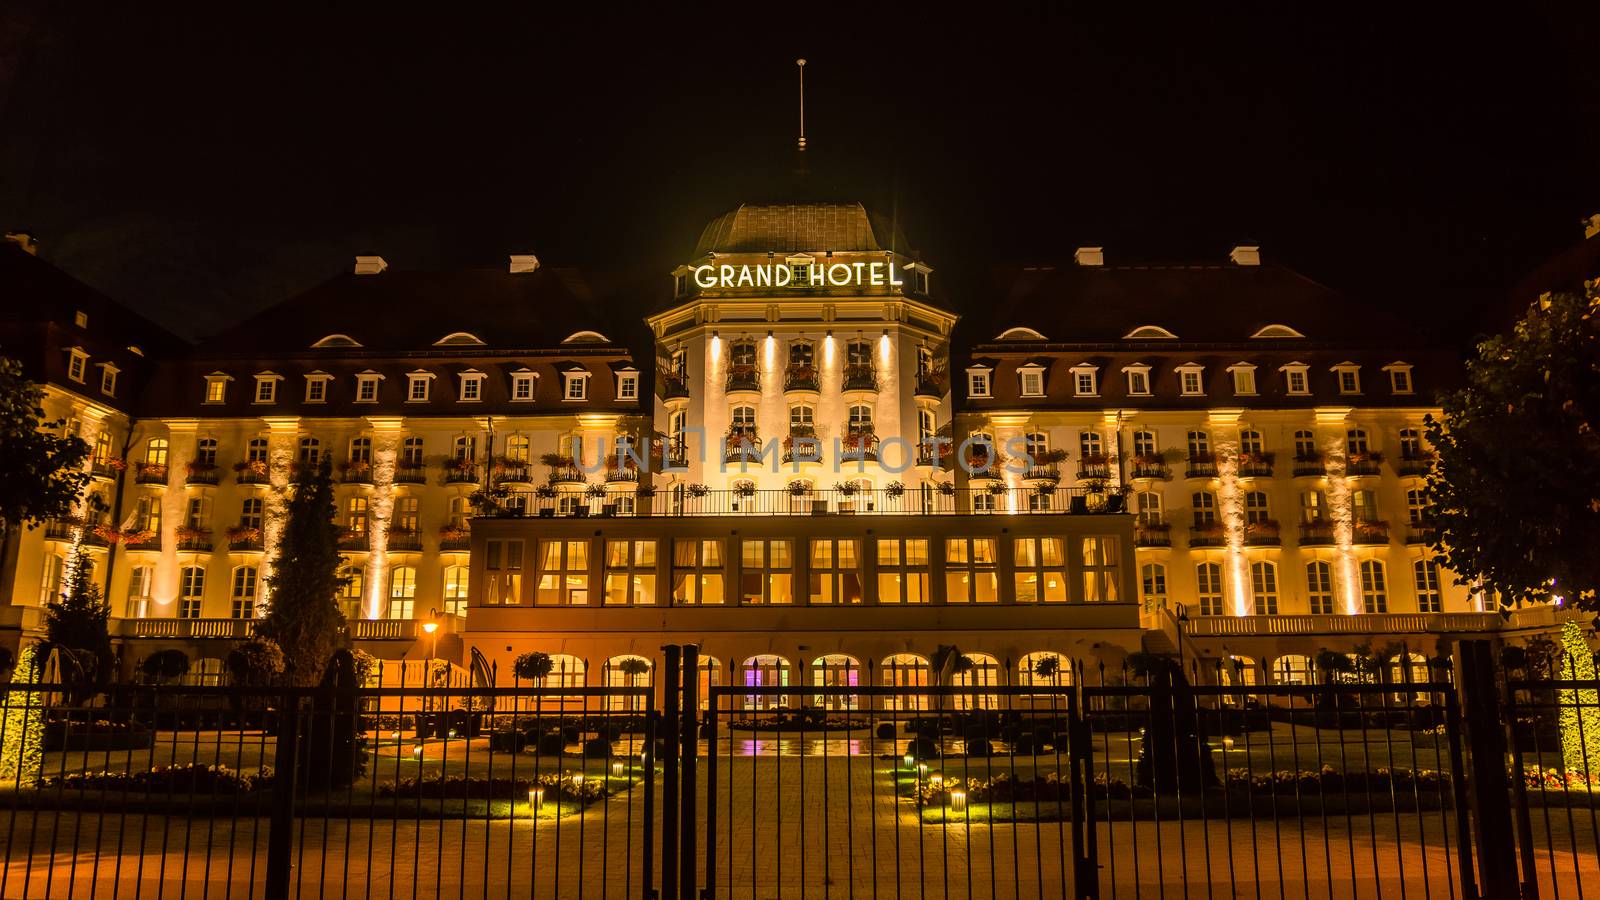 Five stars Sofitel Grand Sopot. Stylish hotel, built in 1927 in Art Noveau and neo-baroque style, remains one of the most recognizable landmarks of the resort.